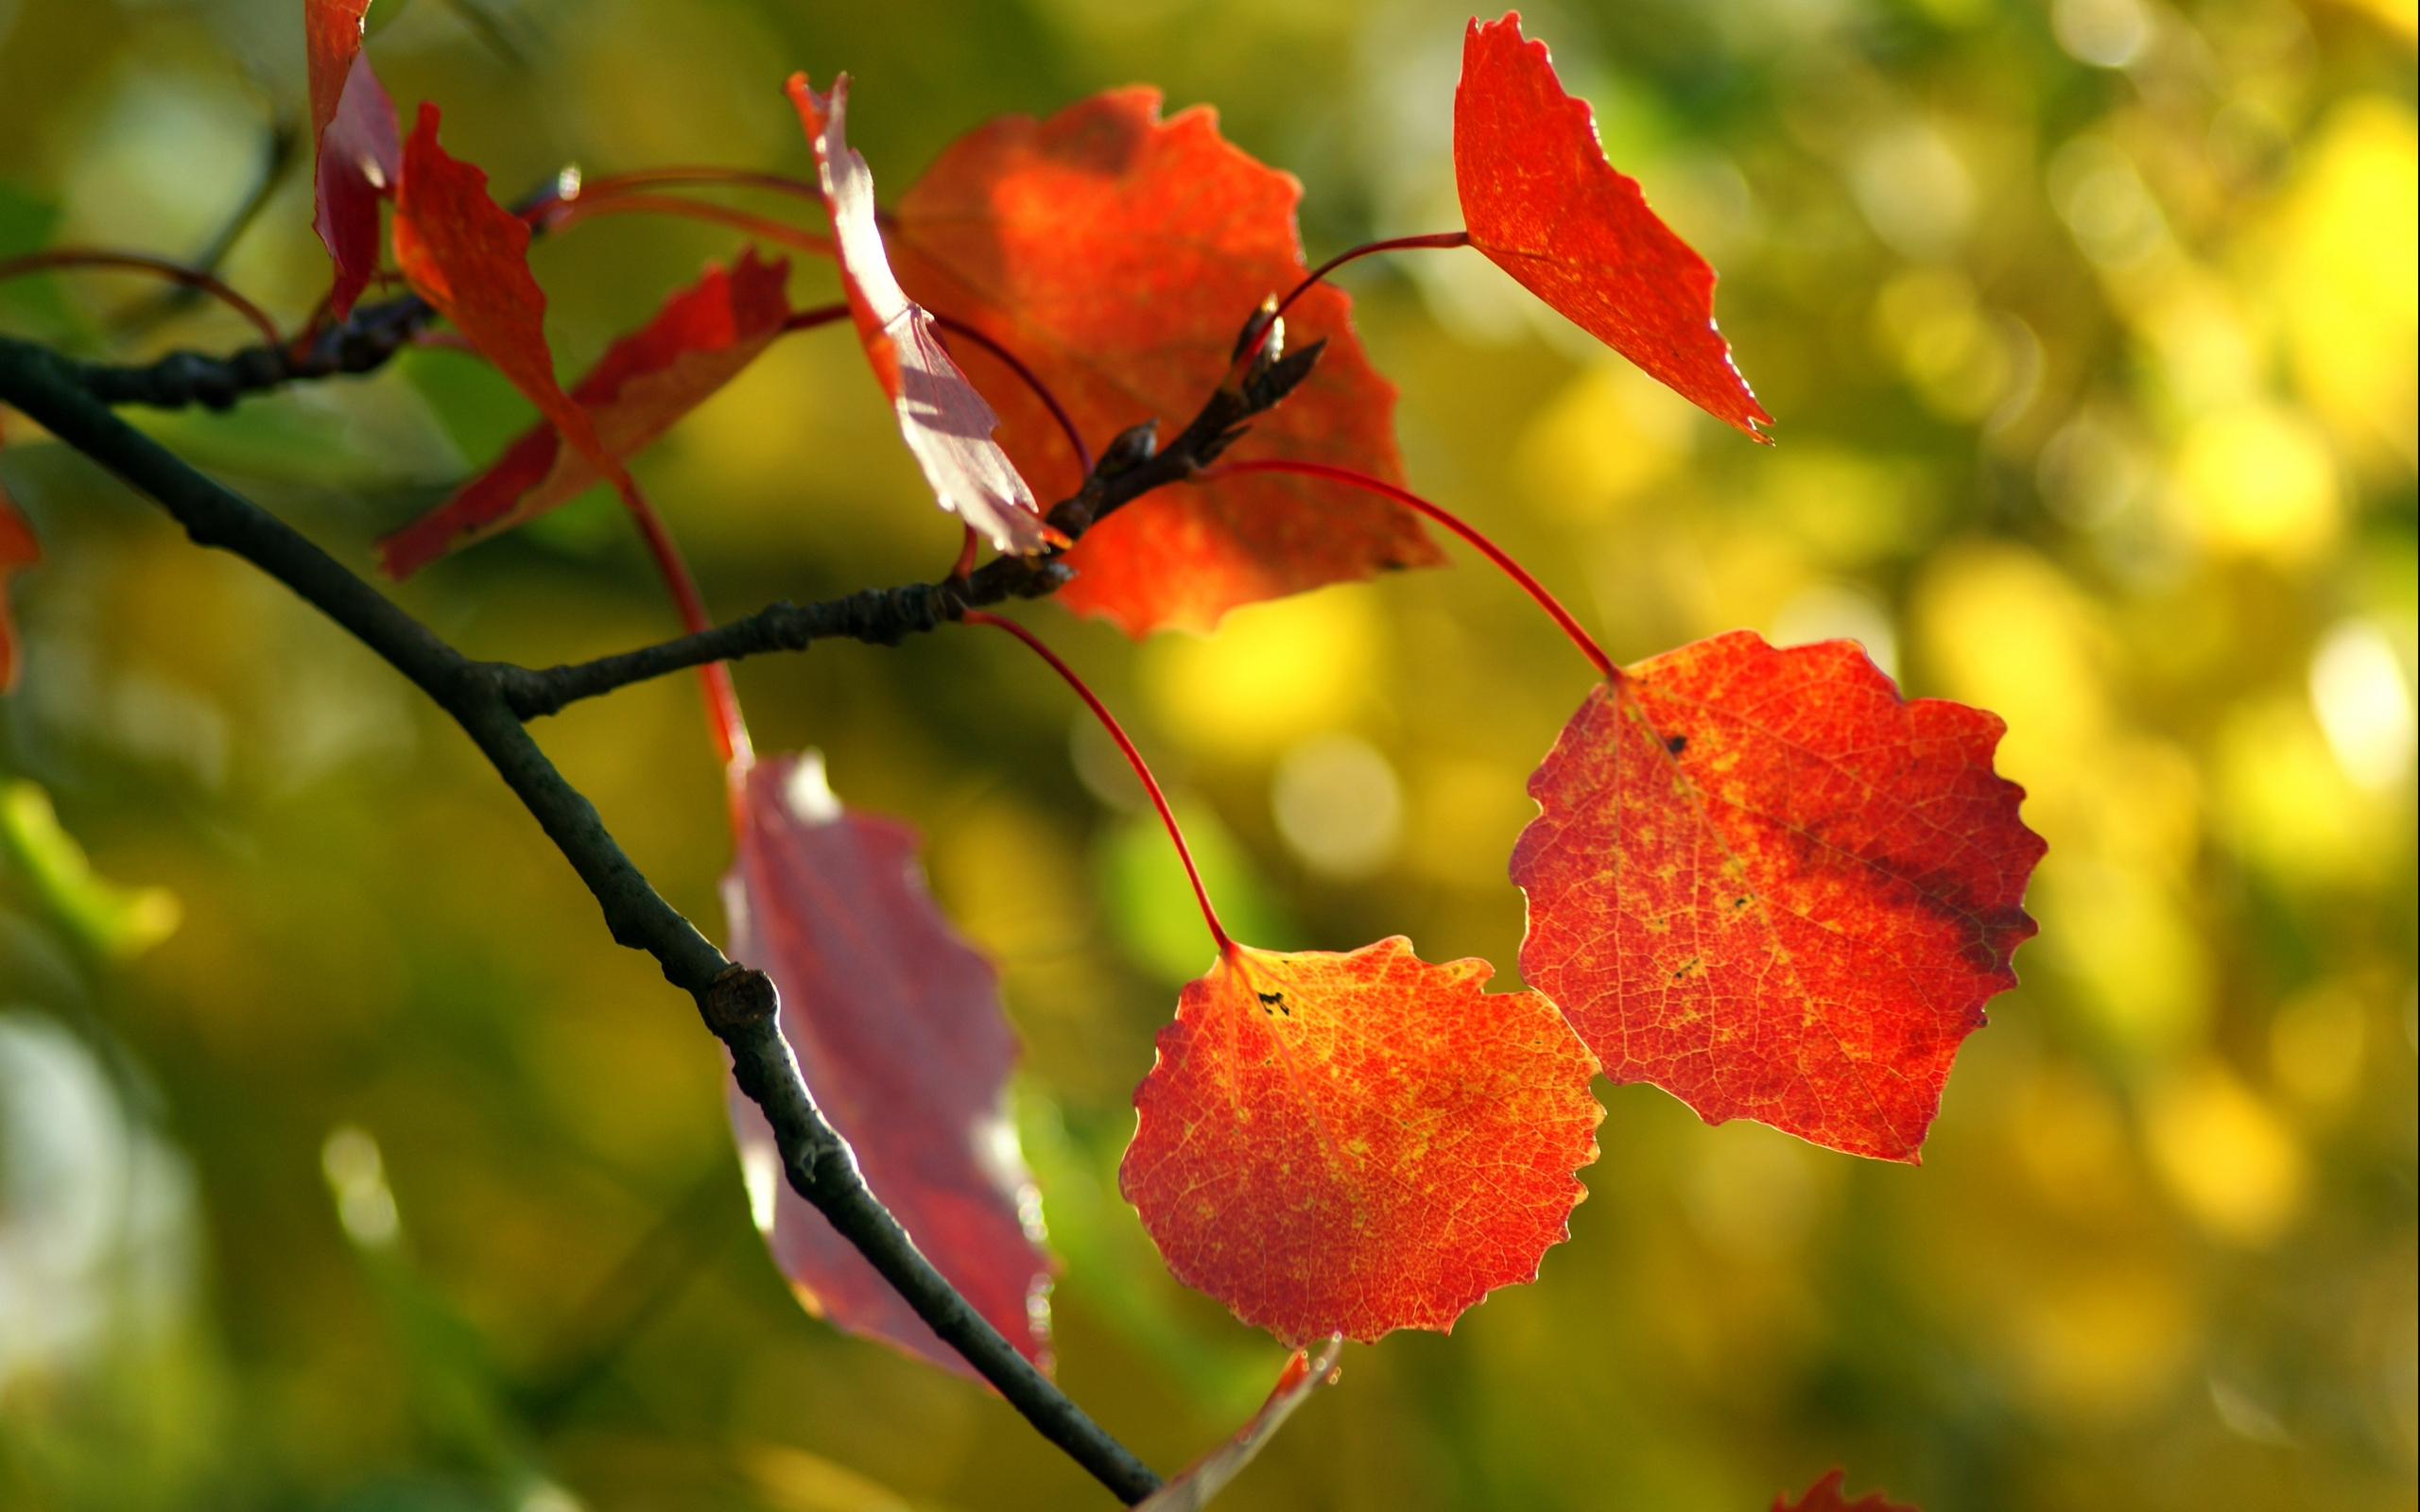 A sprig of fall leaves